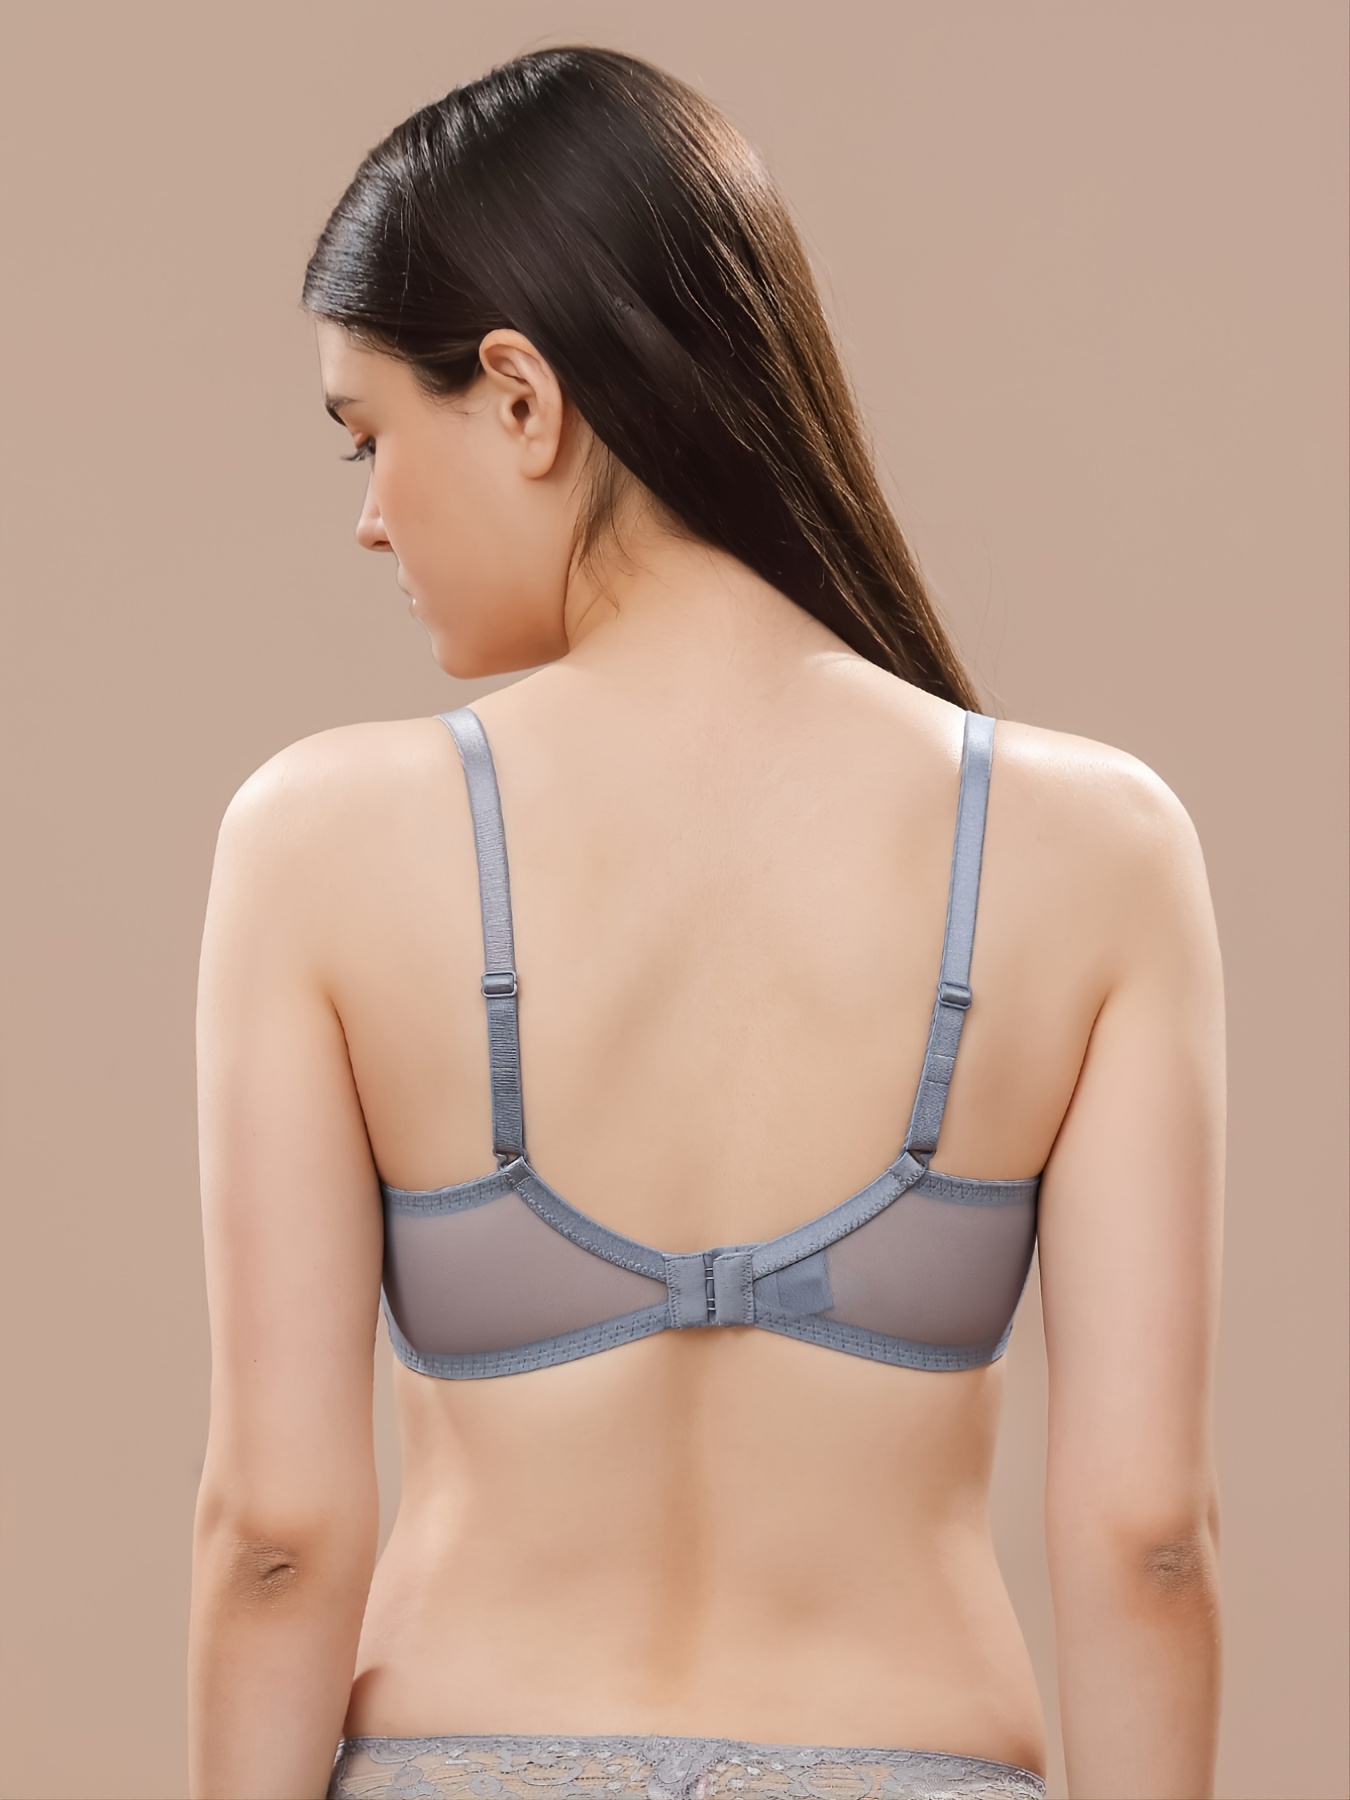 Smart & Sexy See-Through Bras for Women